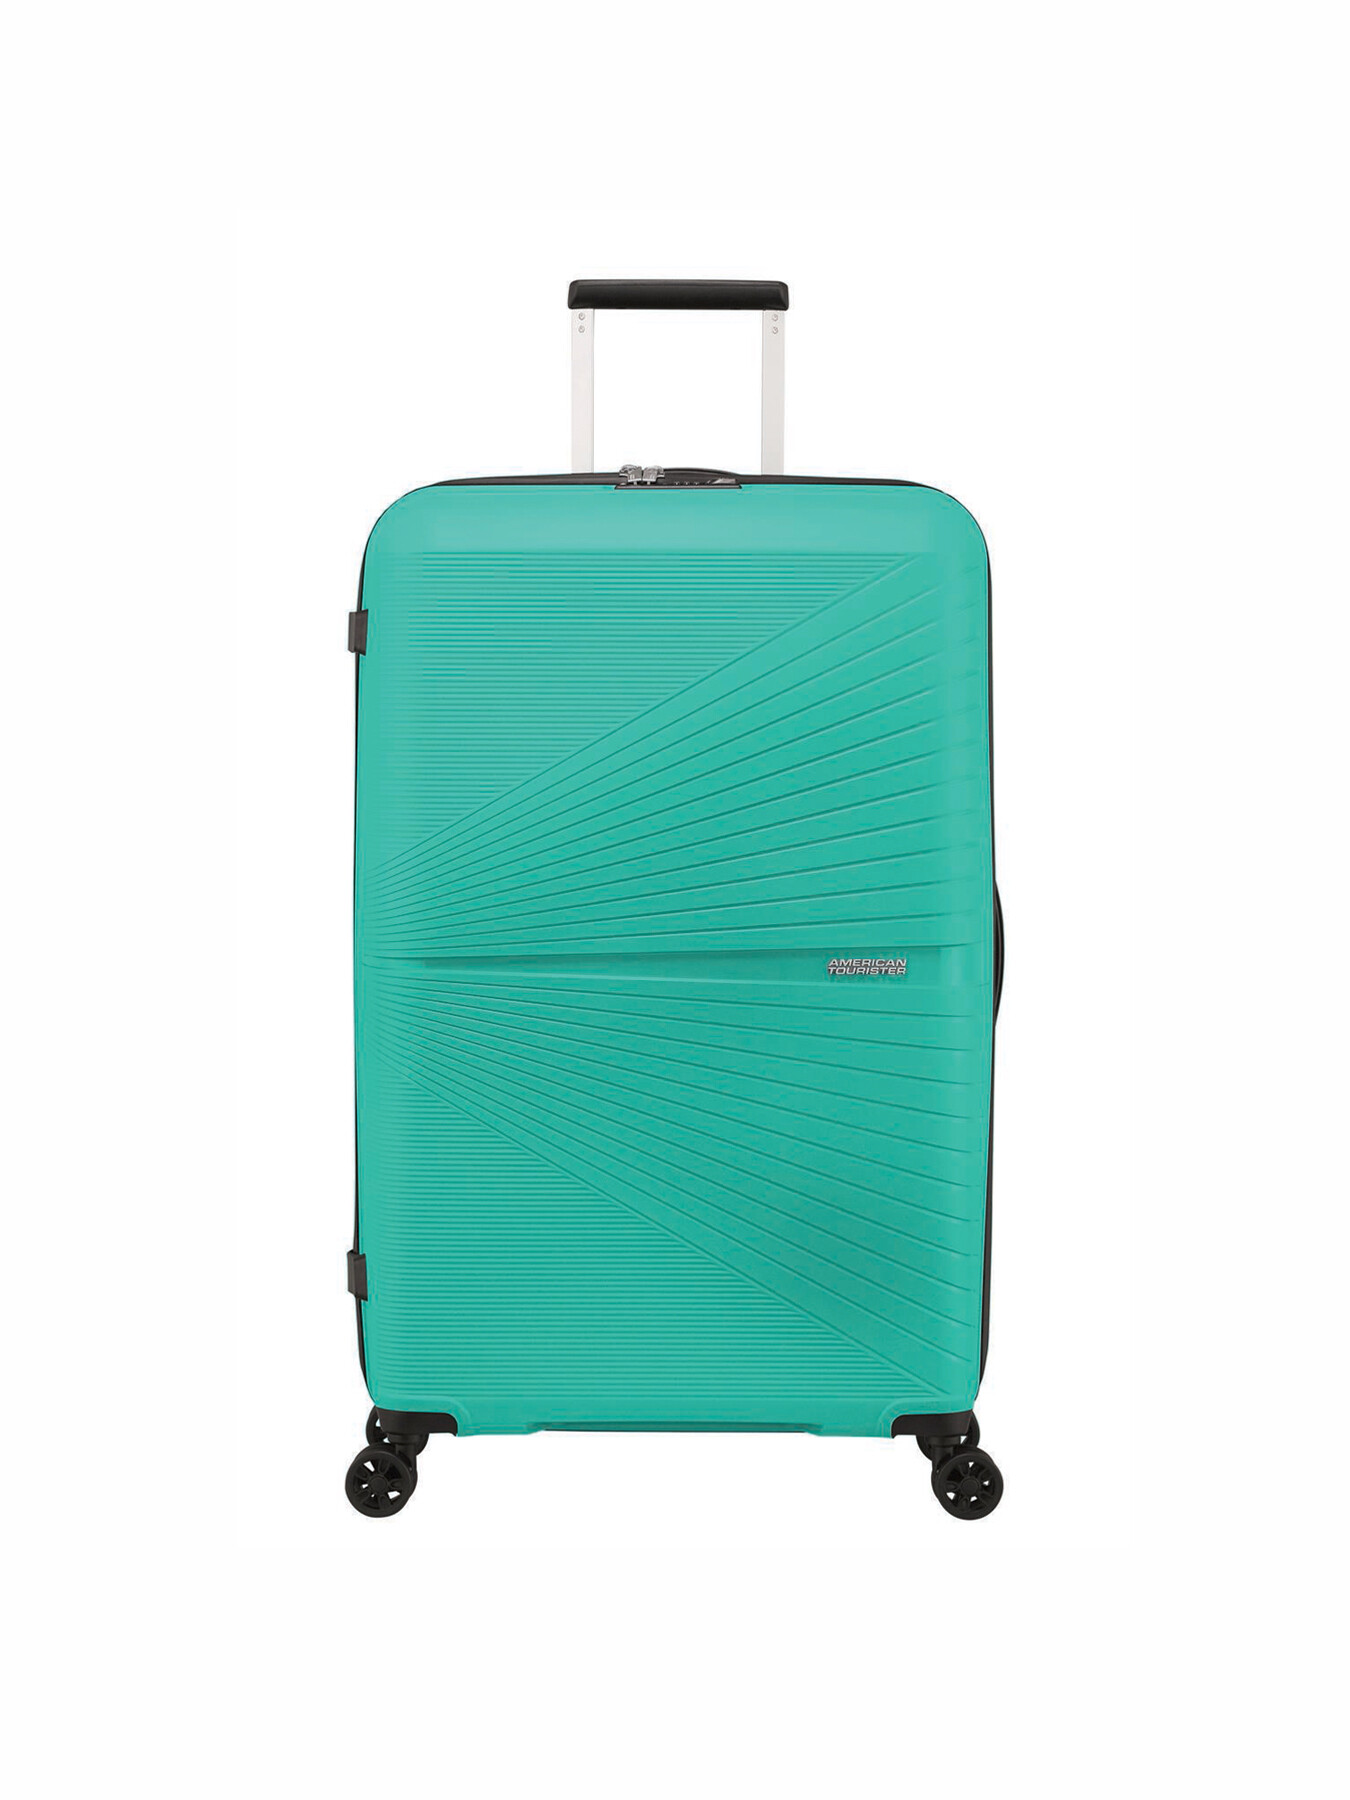 American Tourister American Tourister Airconic Spinner 77cm Suitcase, Aqua  Green | Fenwick